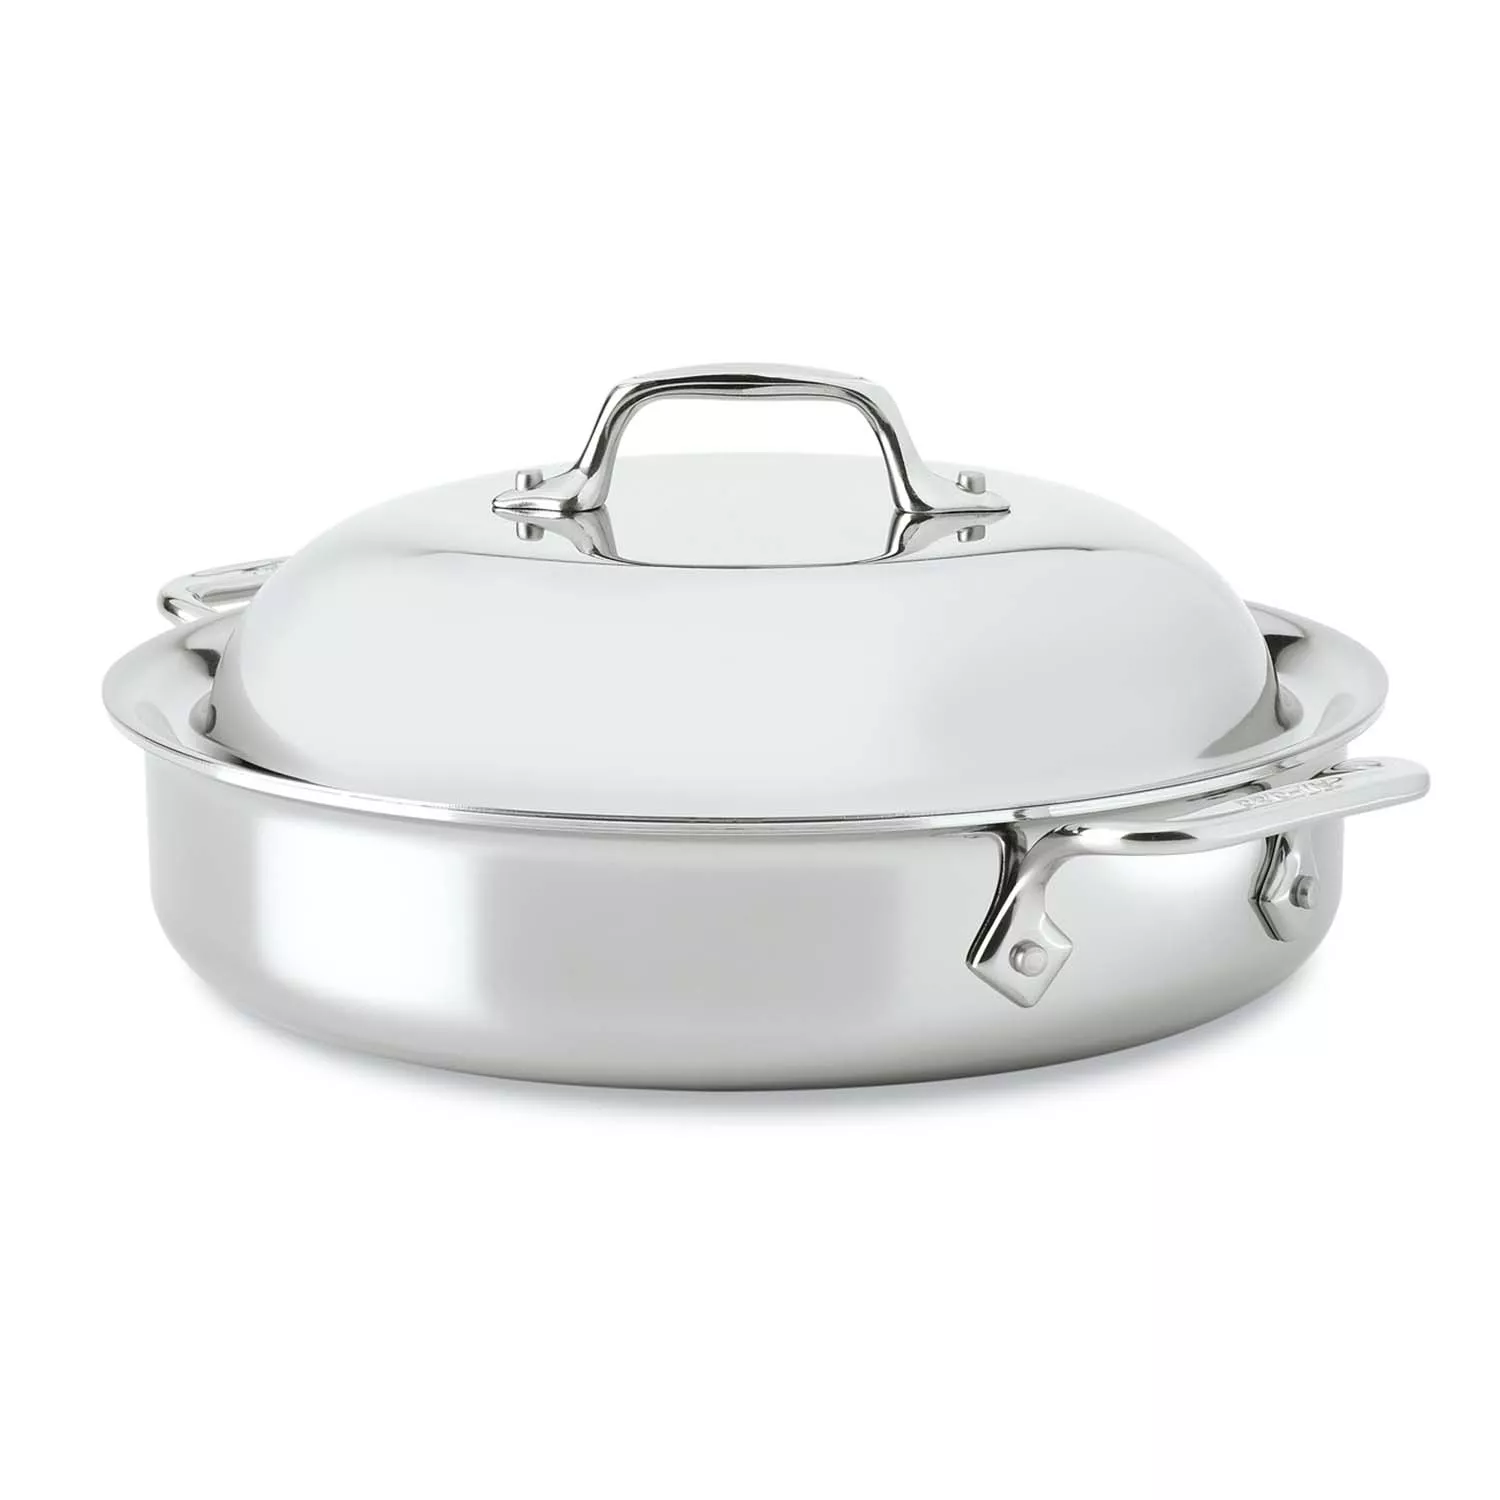 All-Clad 11 in Casserole Pans